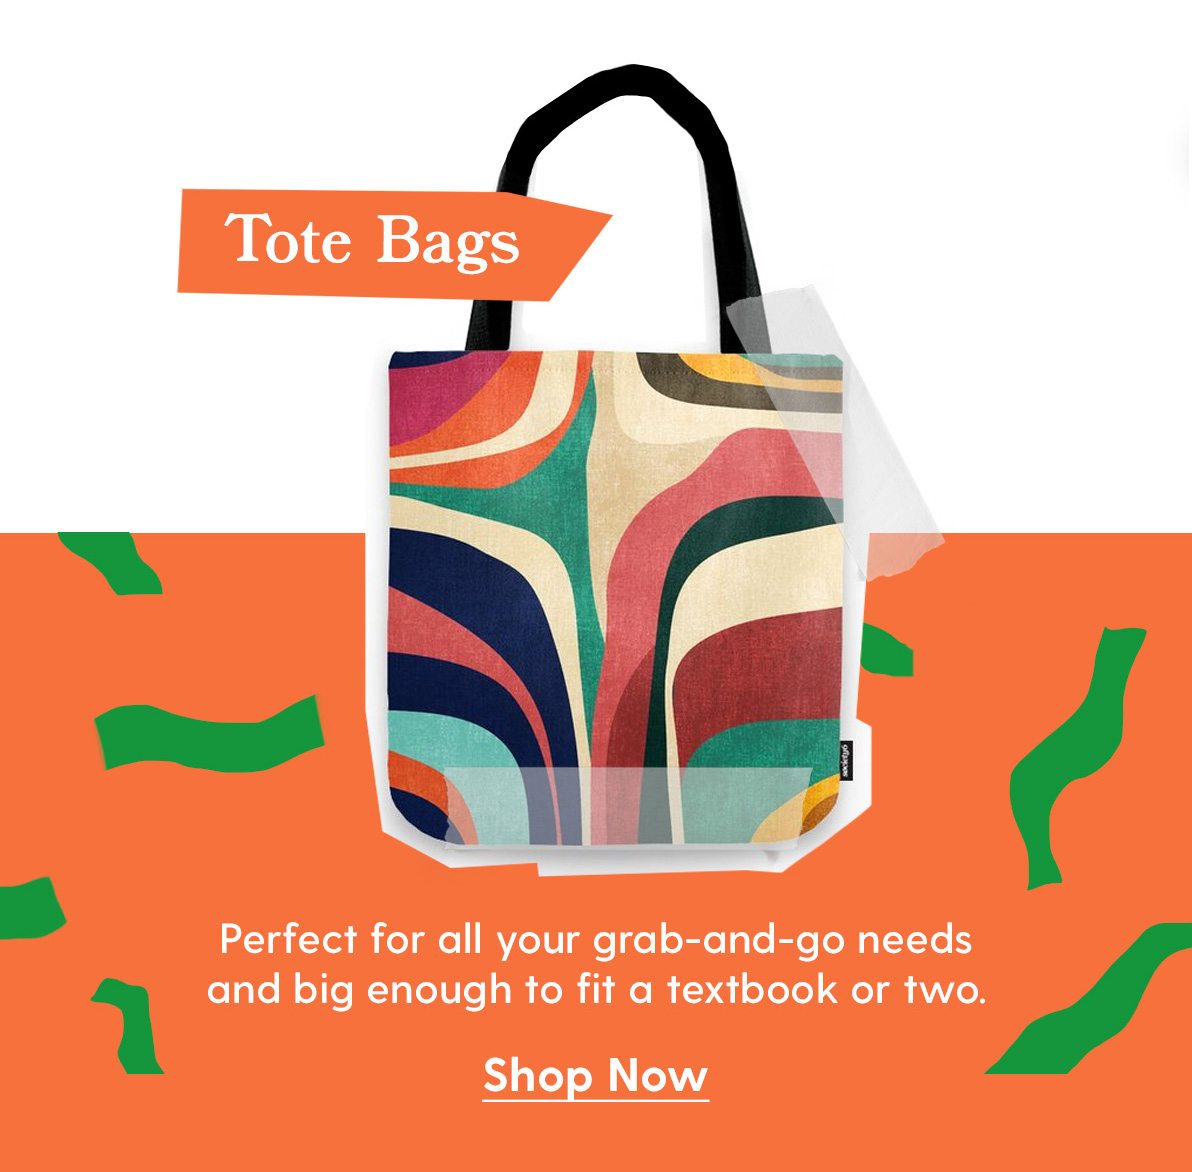 Tote Bags Perfect for all your grab-and-go needs and big enough to fit a textbook or two. Shop Now